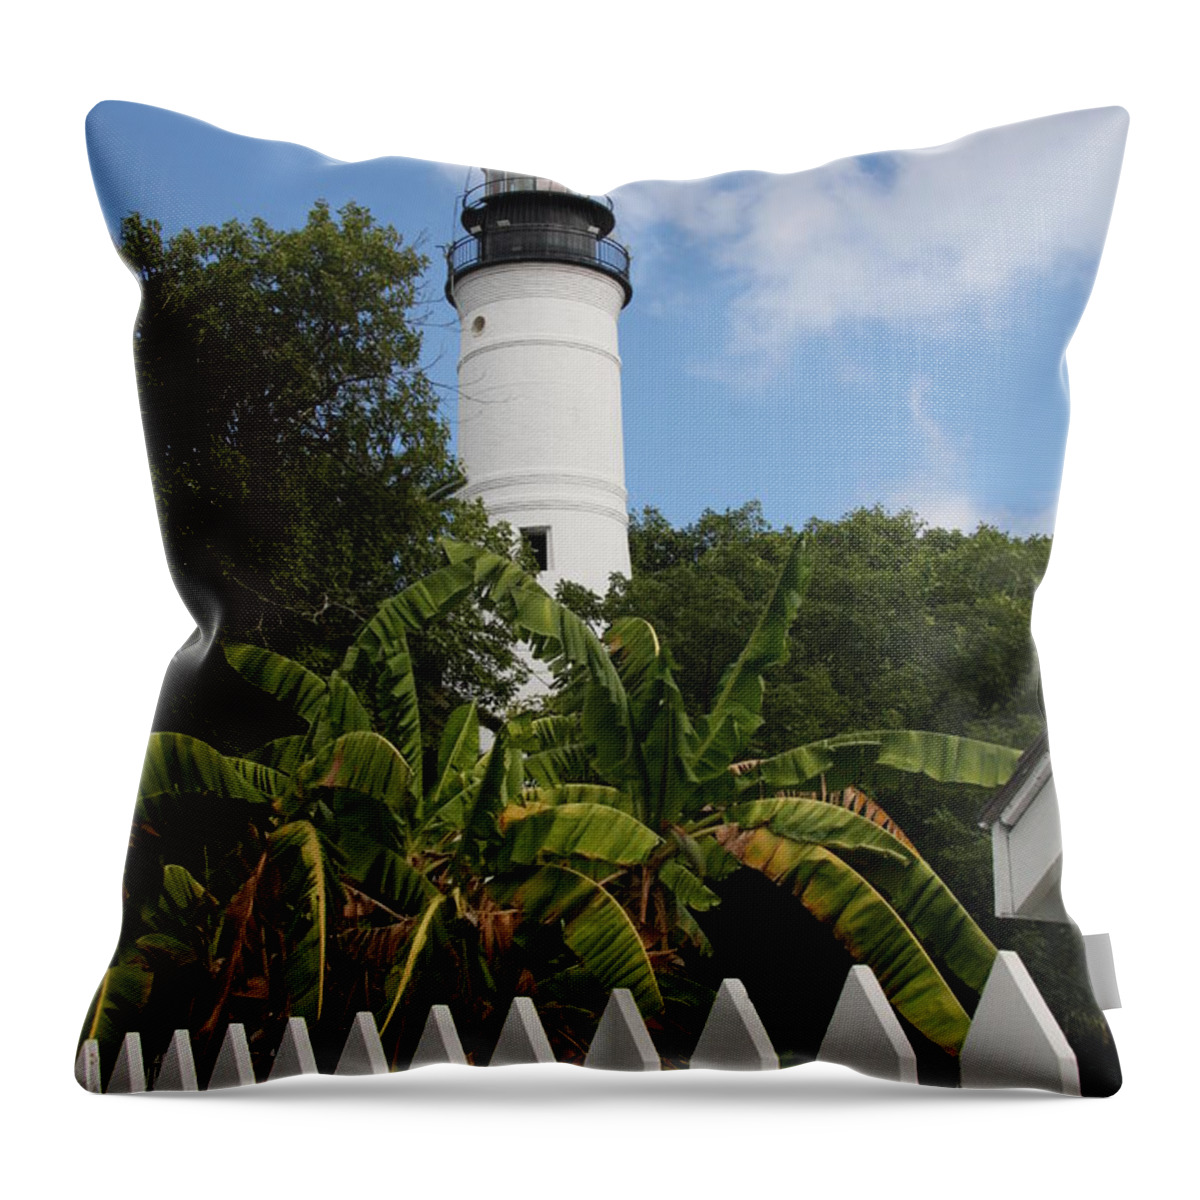 Ligthouse Throw Pillow featuring the photograph A Sailoirs Guide On The Florida Keys by Christiane Schulze Art And Photography